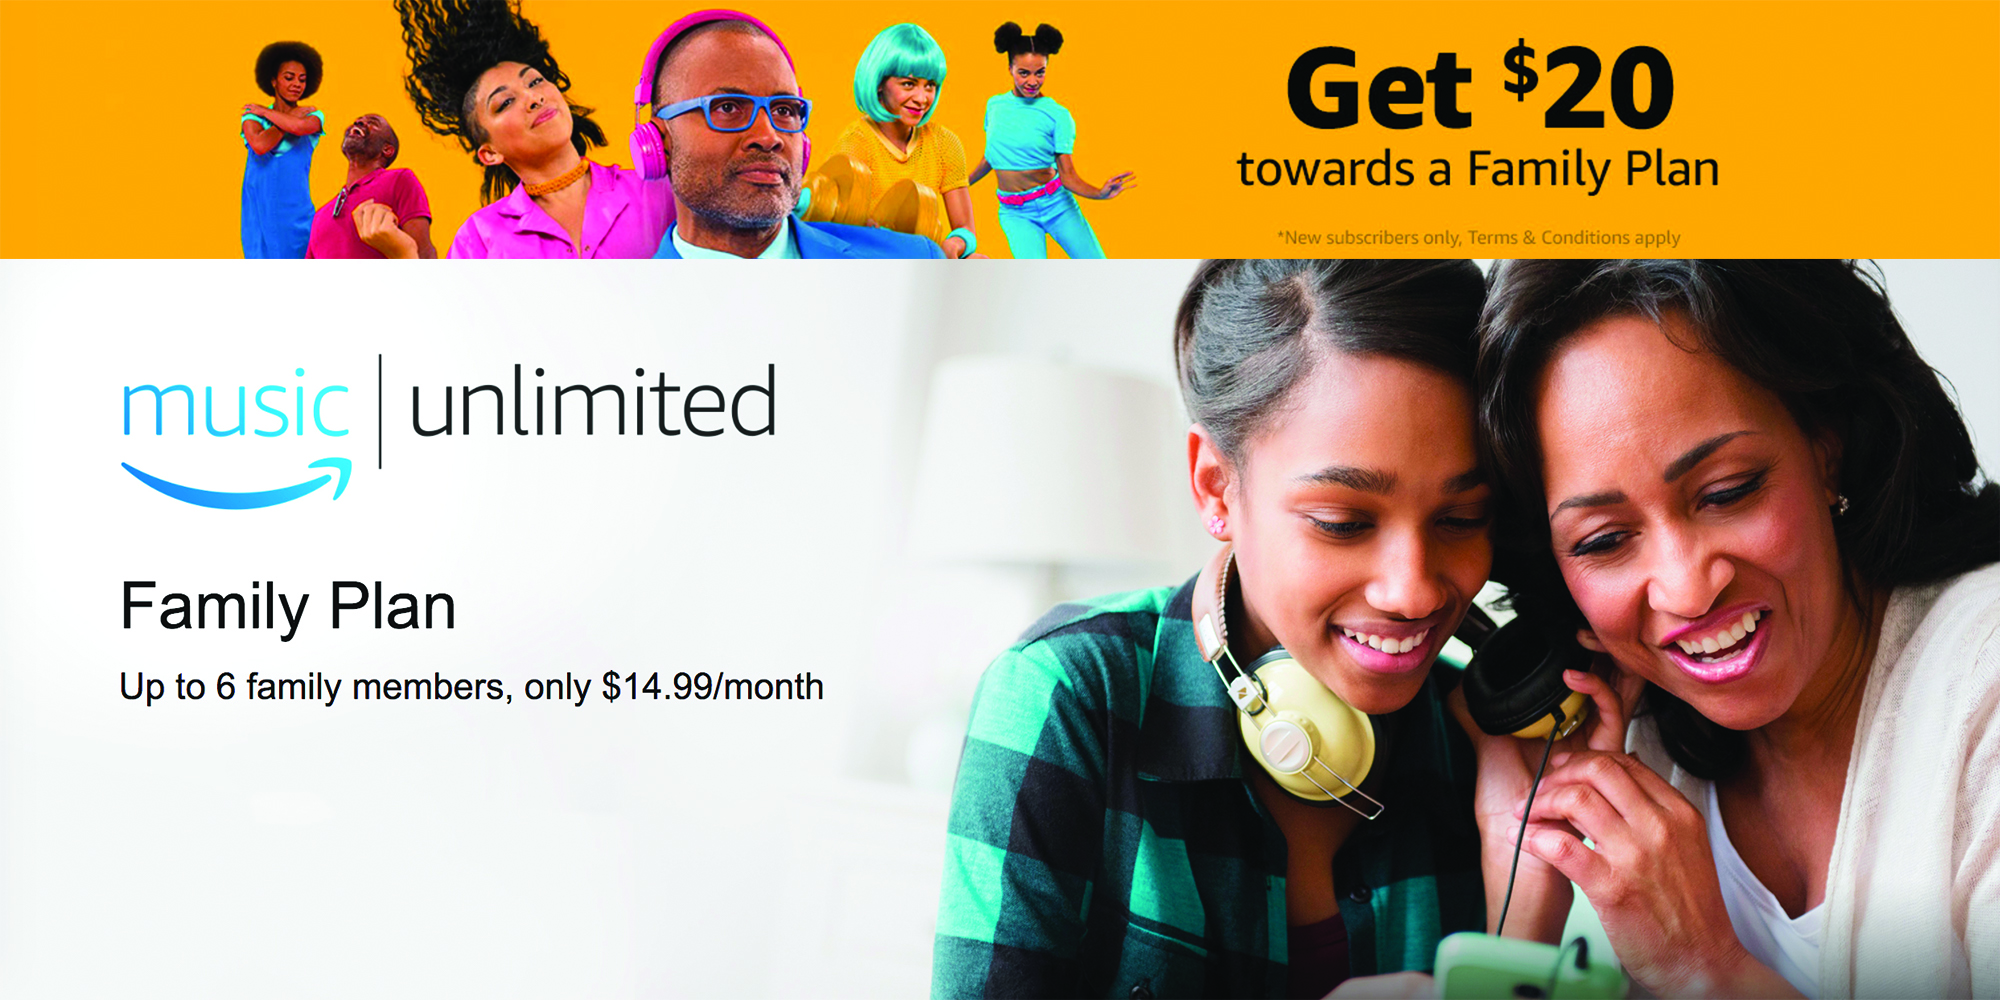 Save 20 on an Amazon Music Unlimited Family Plan with this promo code